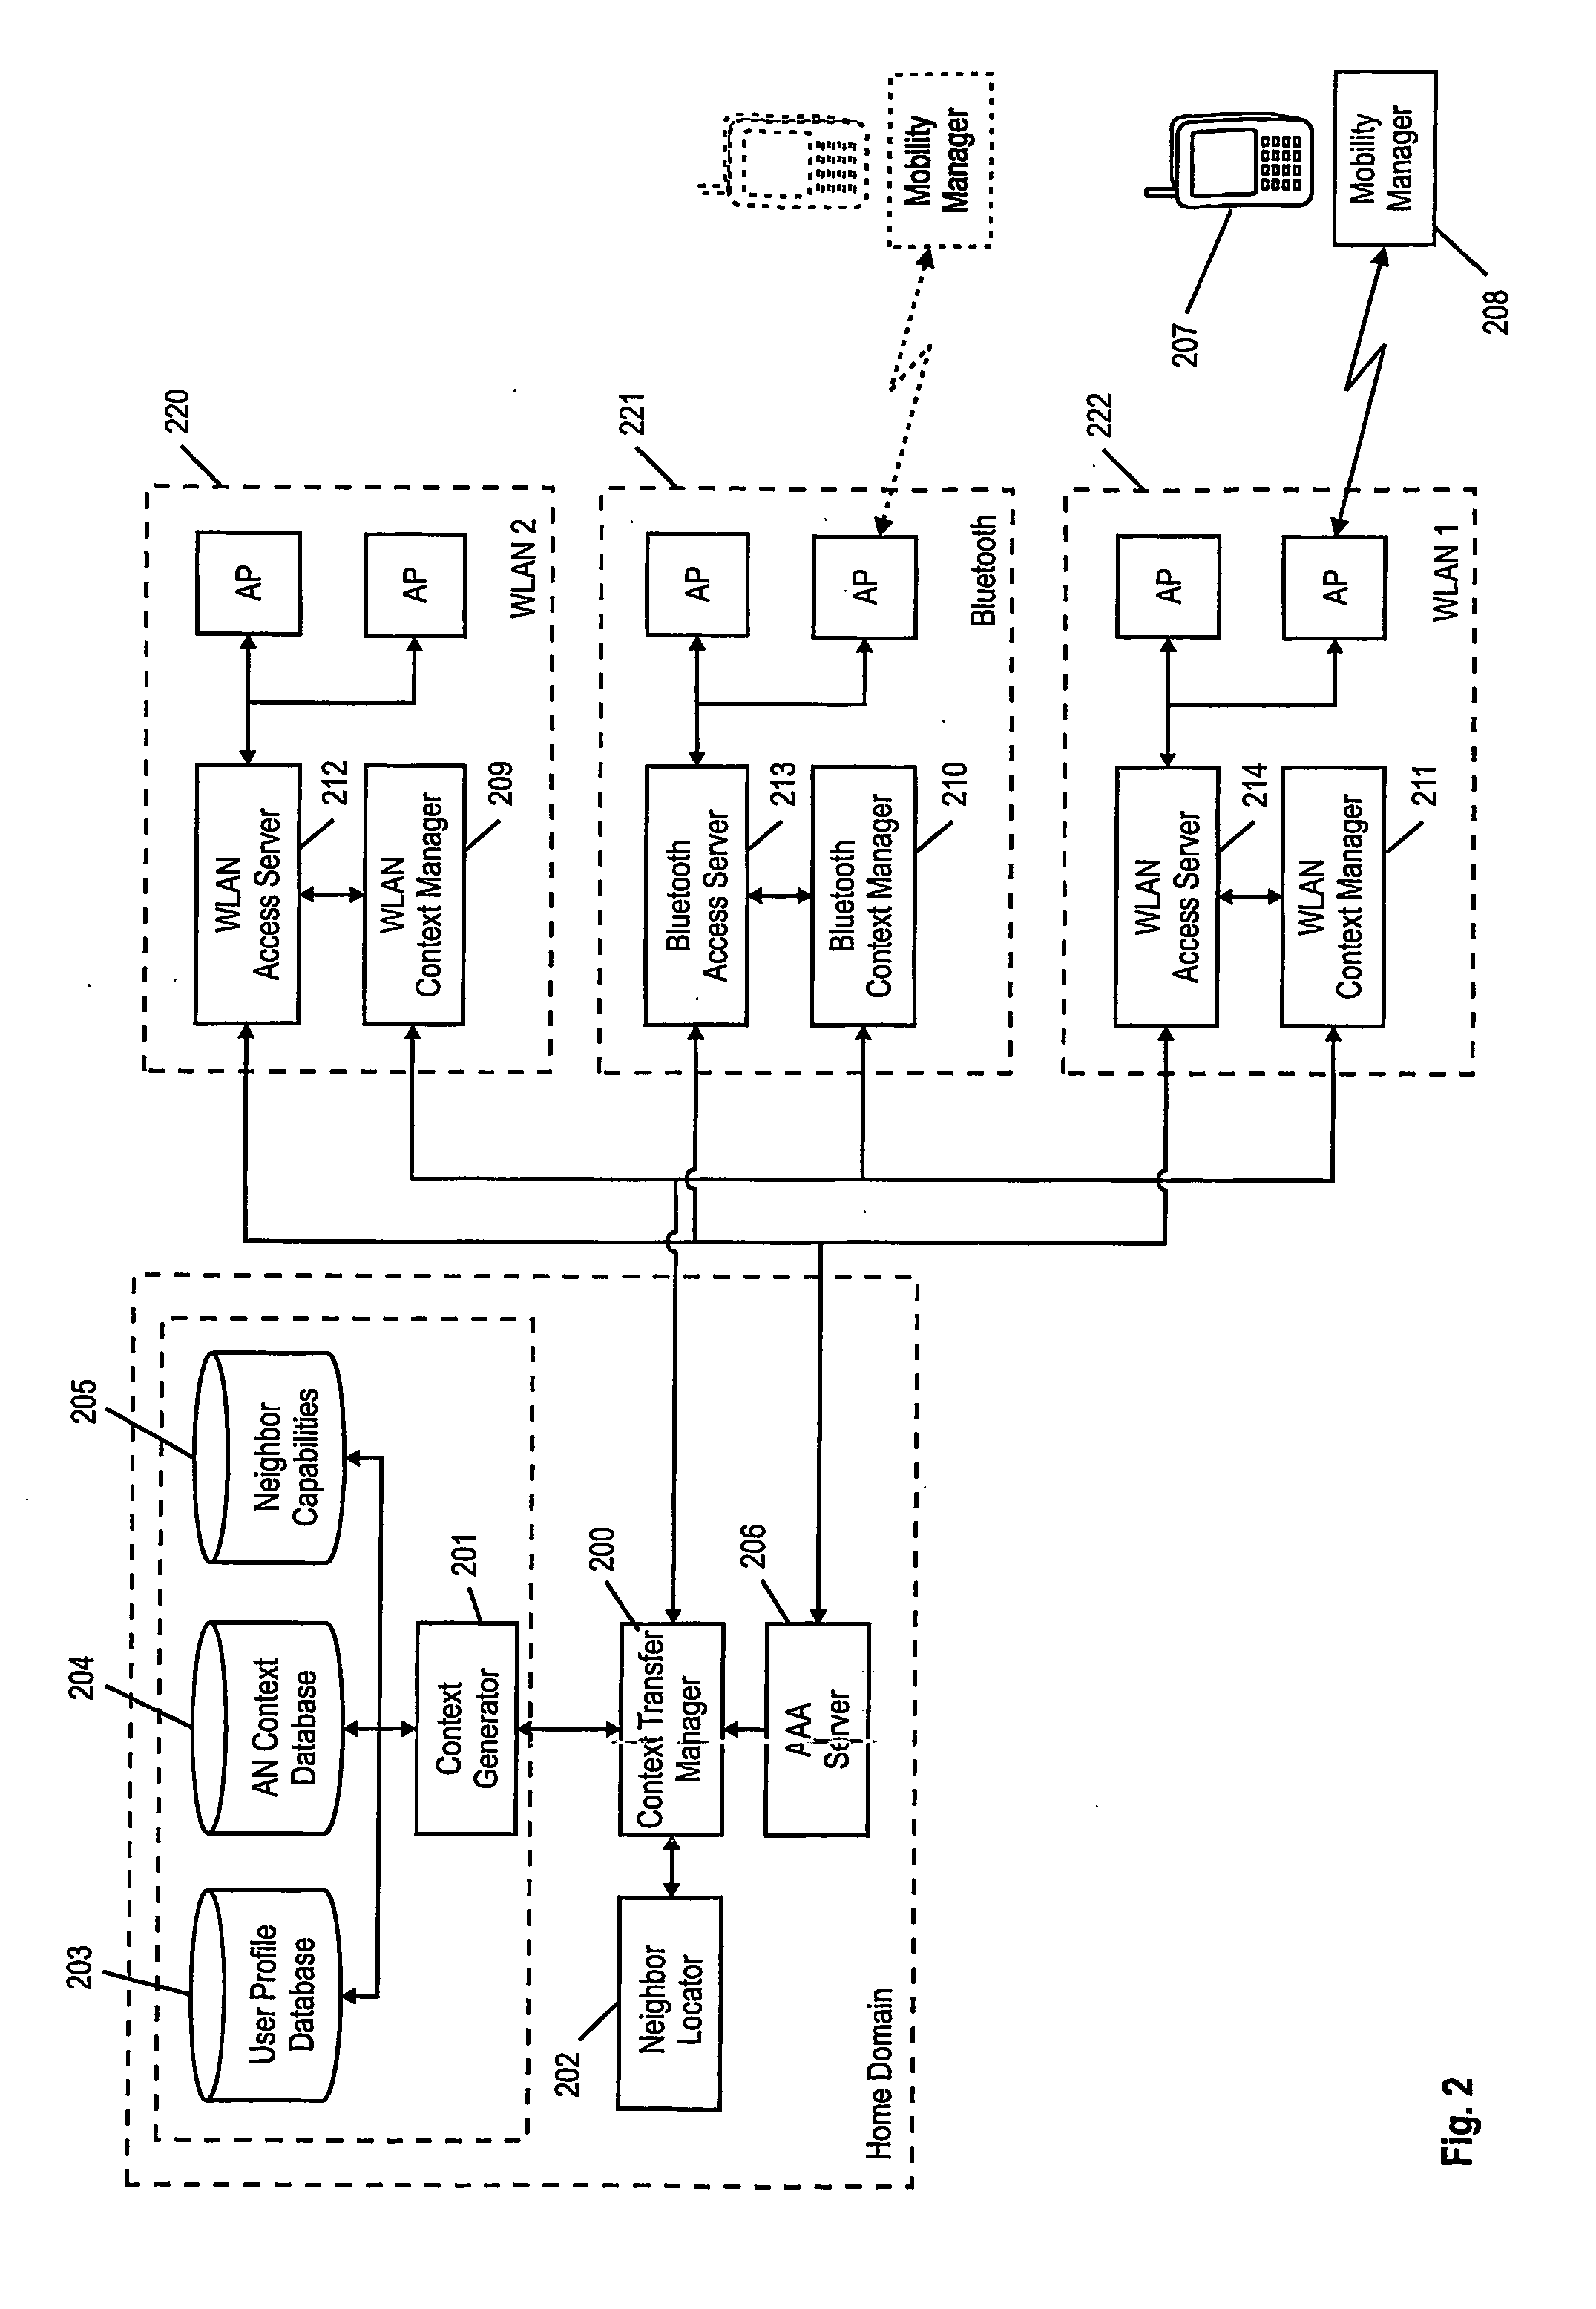 Contex transfer in a communication network comprising plural heterogeneous access networks